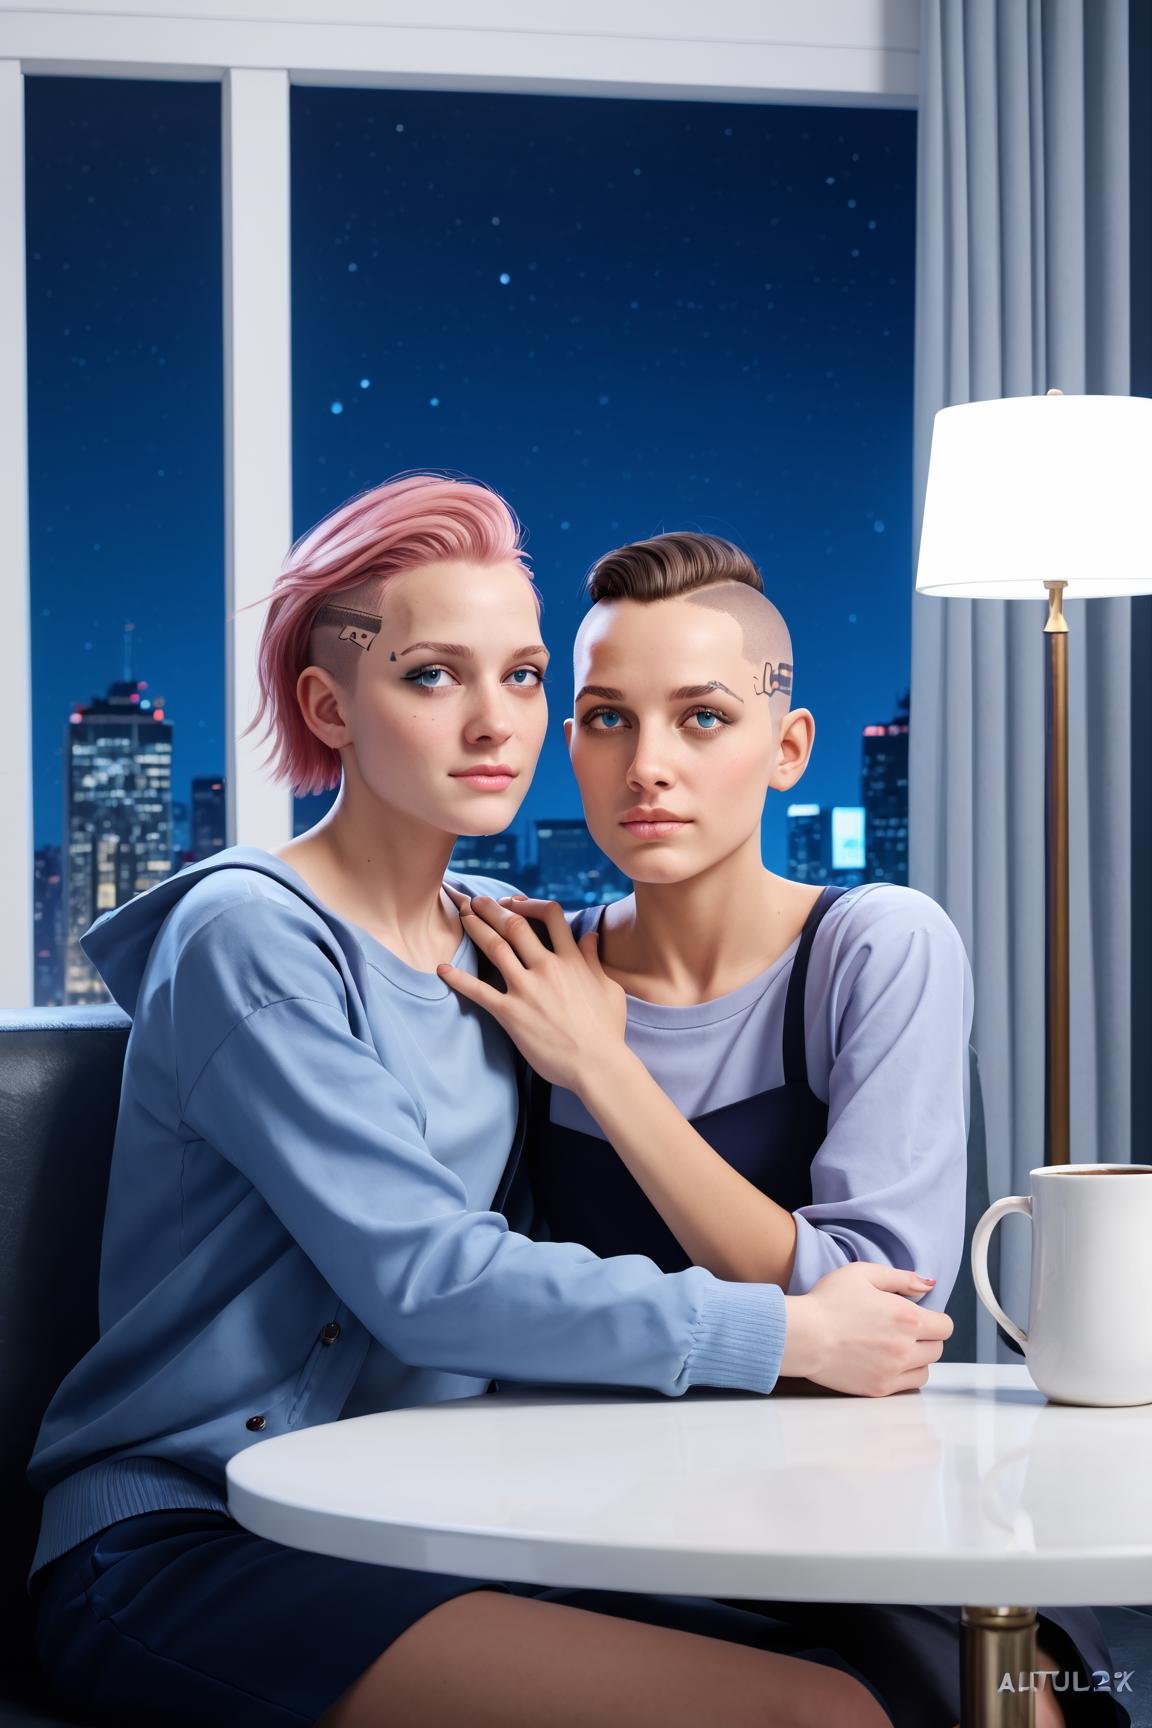 zPDXL2, zPDXLpg, zPDXLrl, 2girls, beautiful, shaved head, pink hair, hugging, cyberpunk living room, sofa, chairs, coffee table, low light, dark, low key, night, cityscape in the background